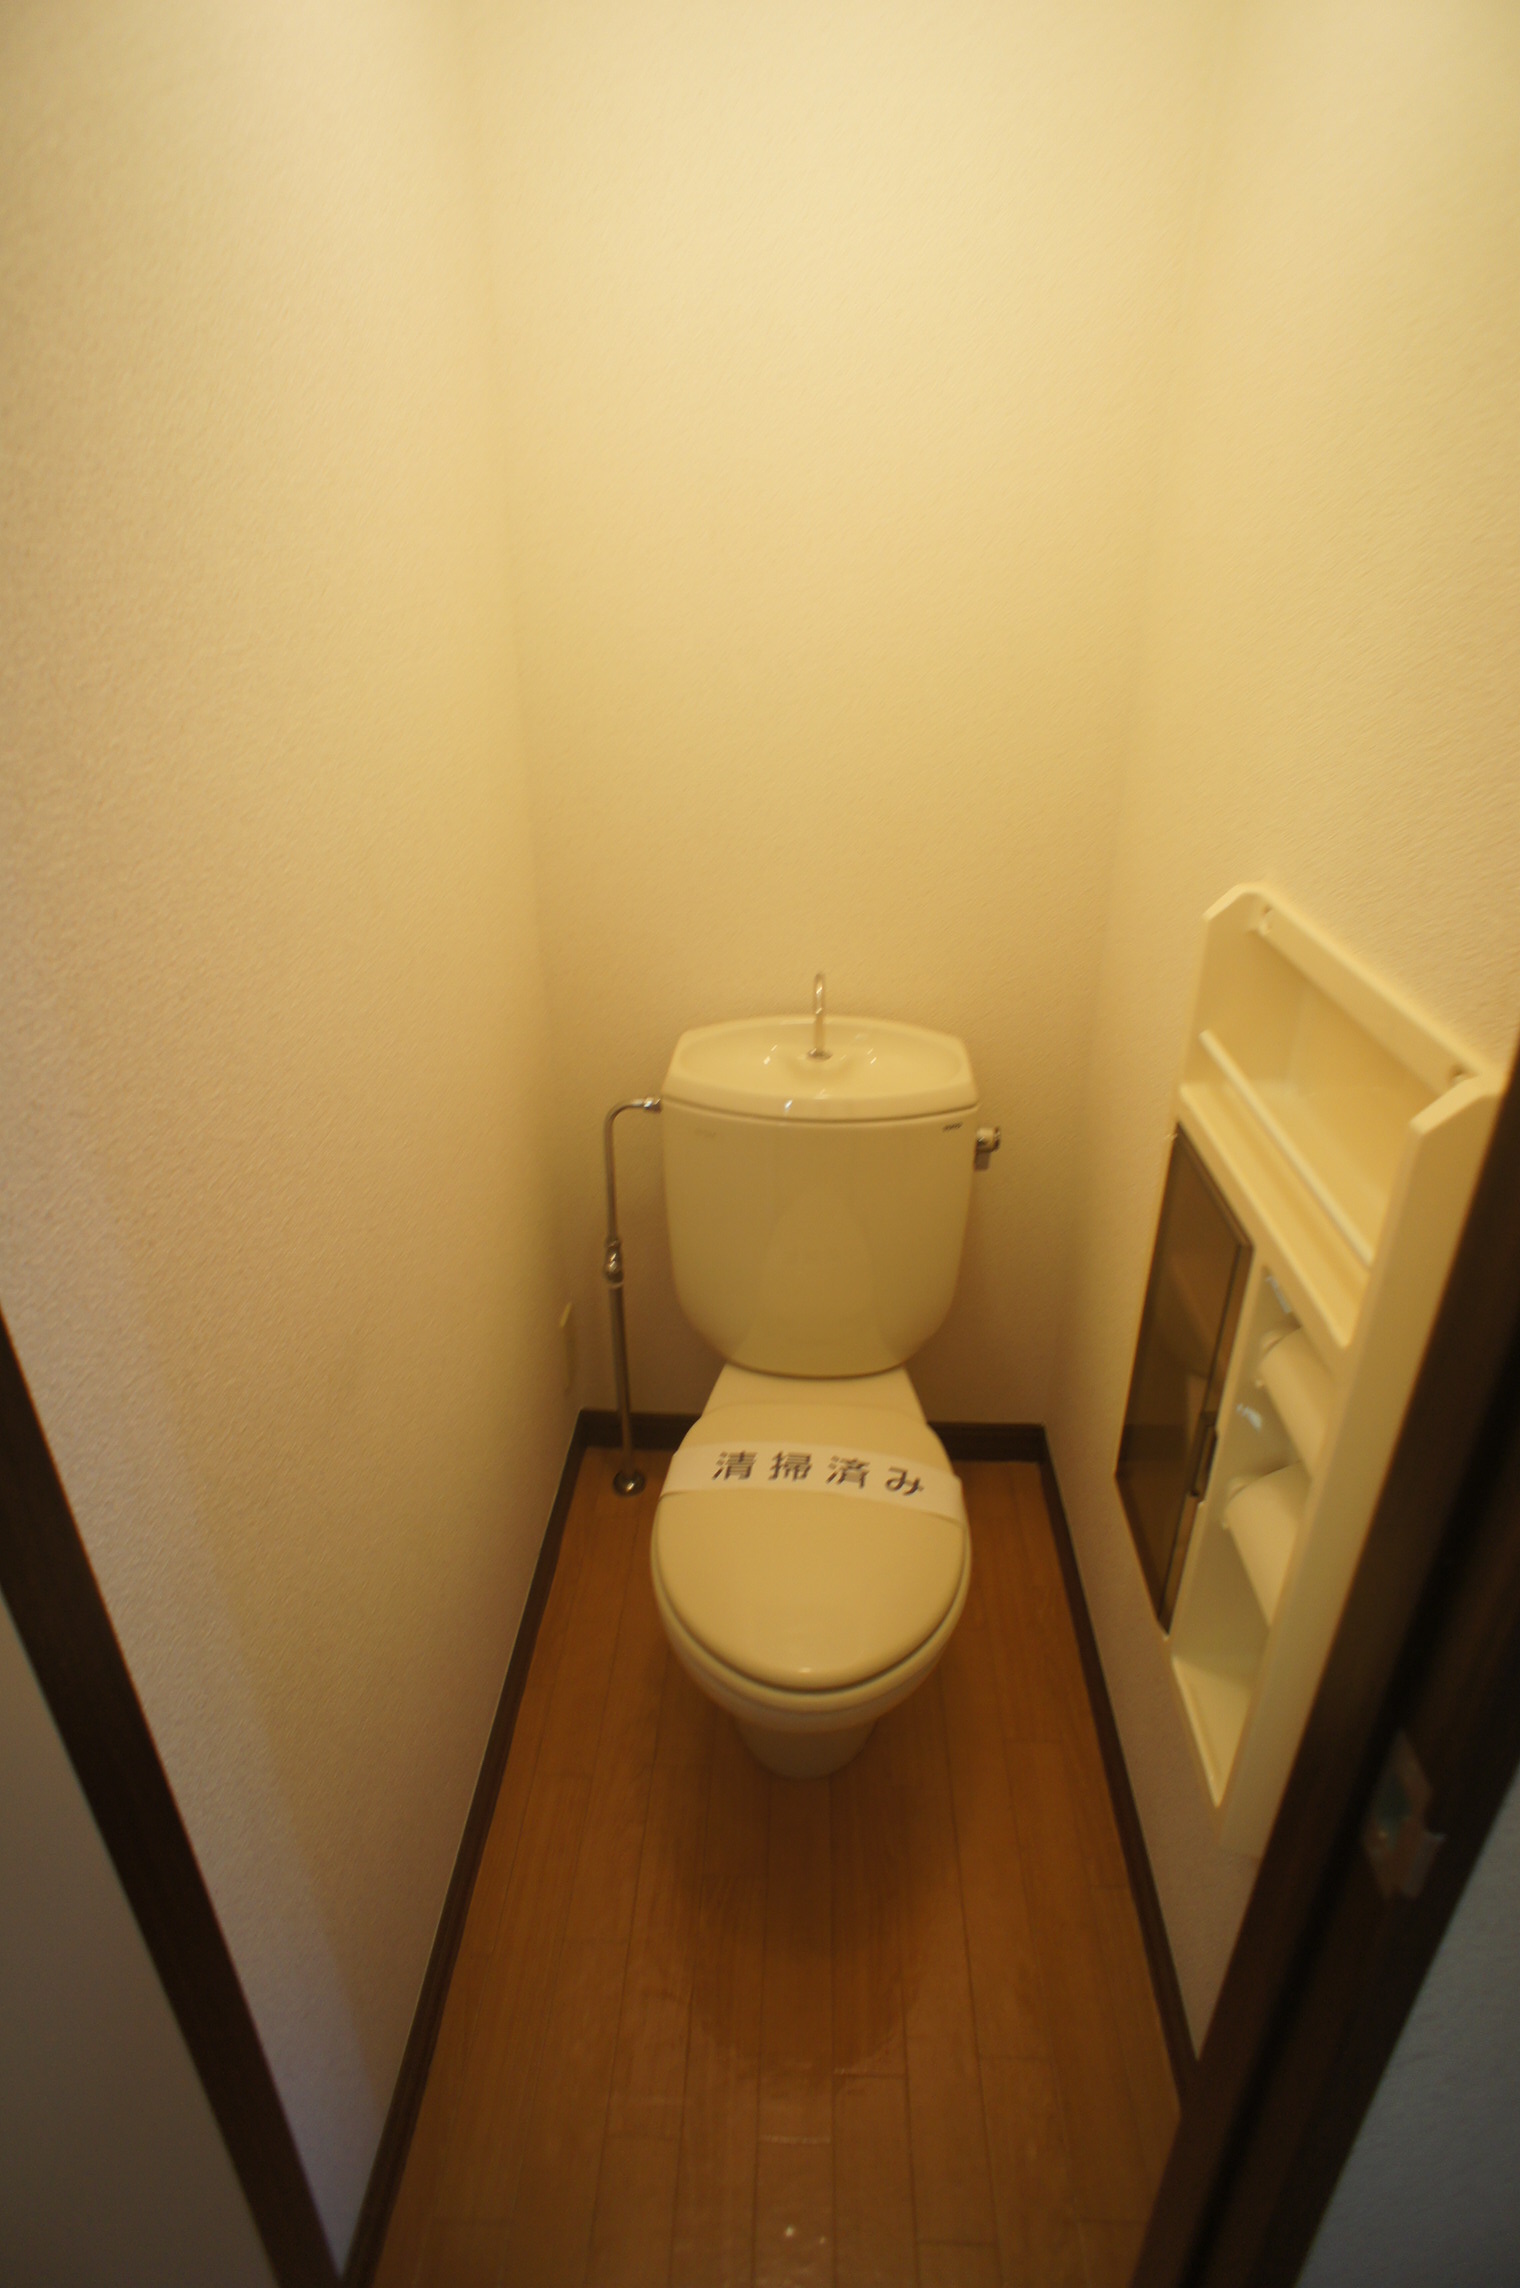 Toilet. With paper stocker